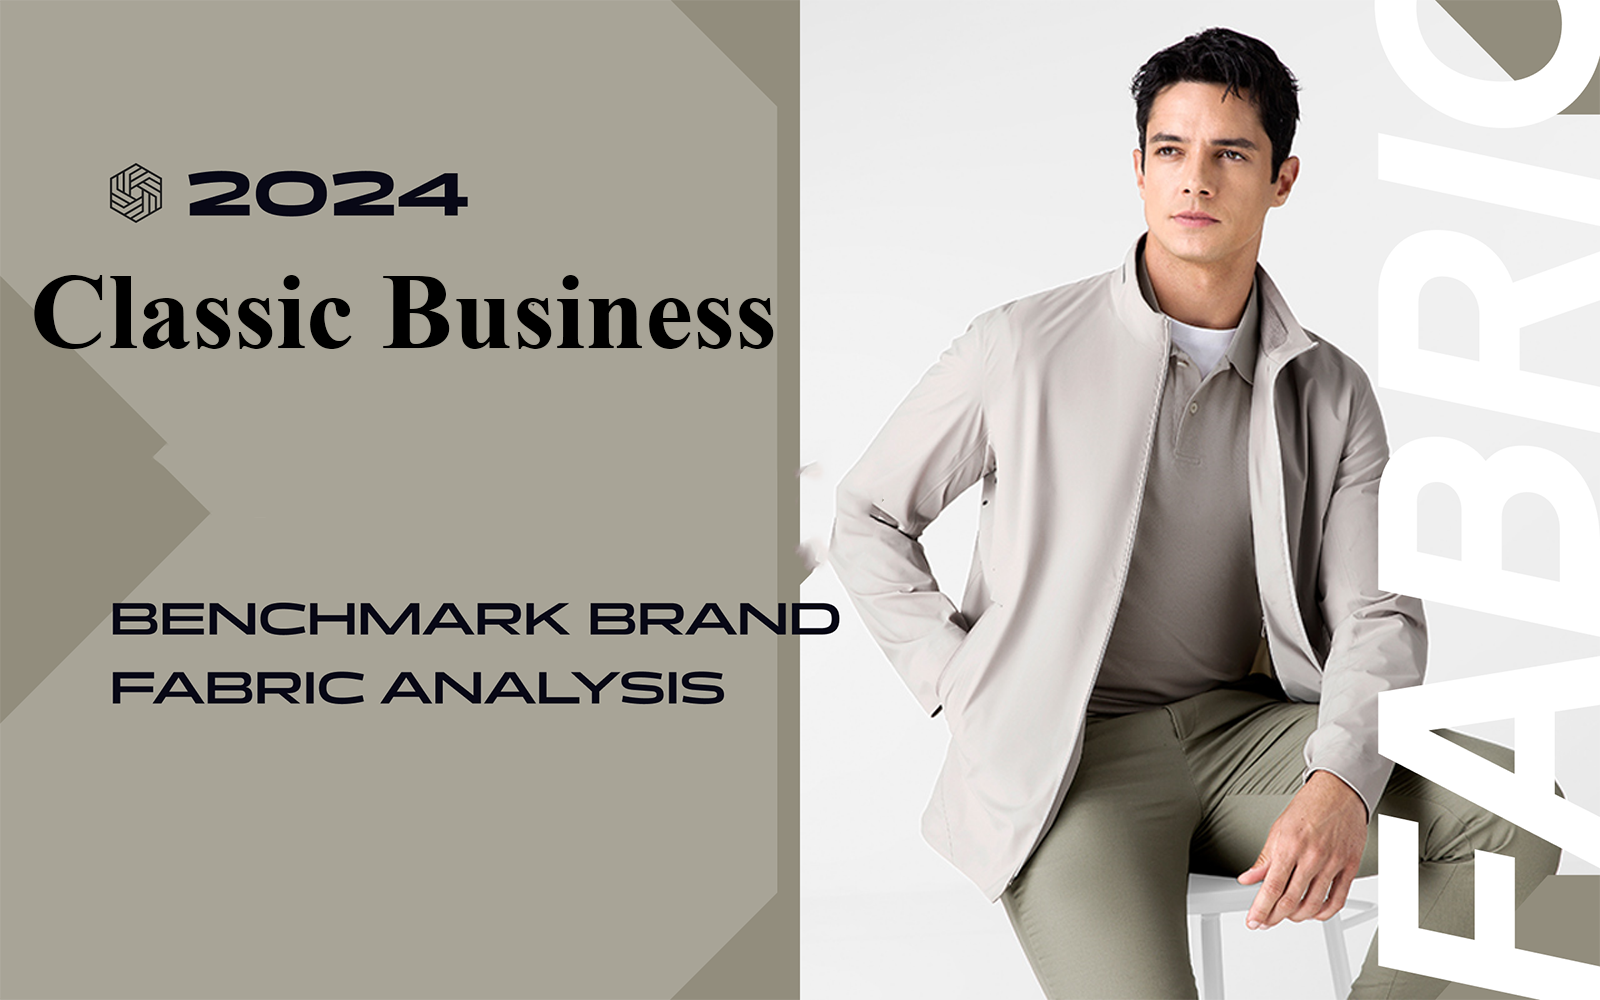 Classic Business -- The Comprehensive Fabric Analysis of Men's Wear Benchmark Brands